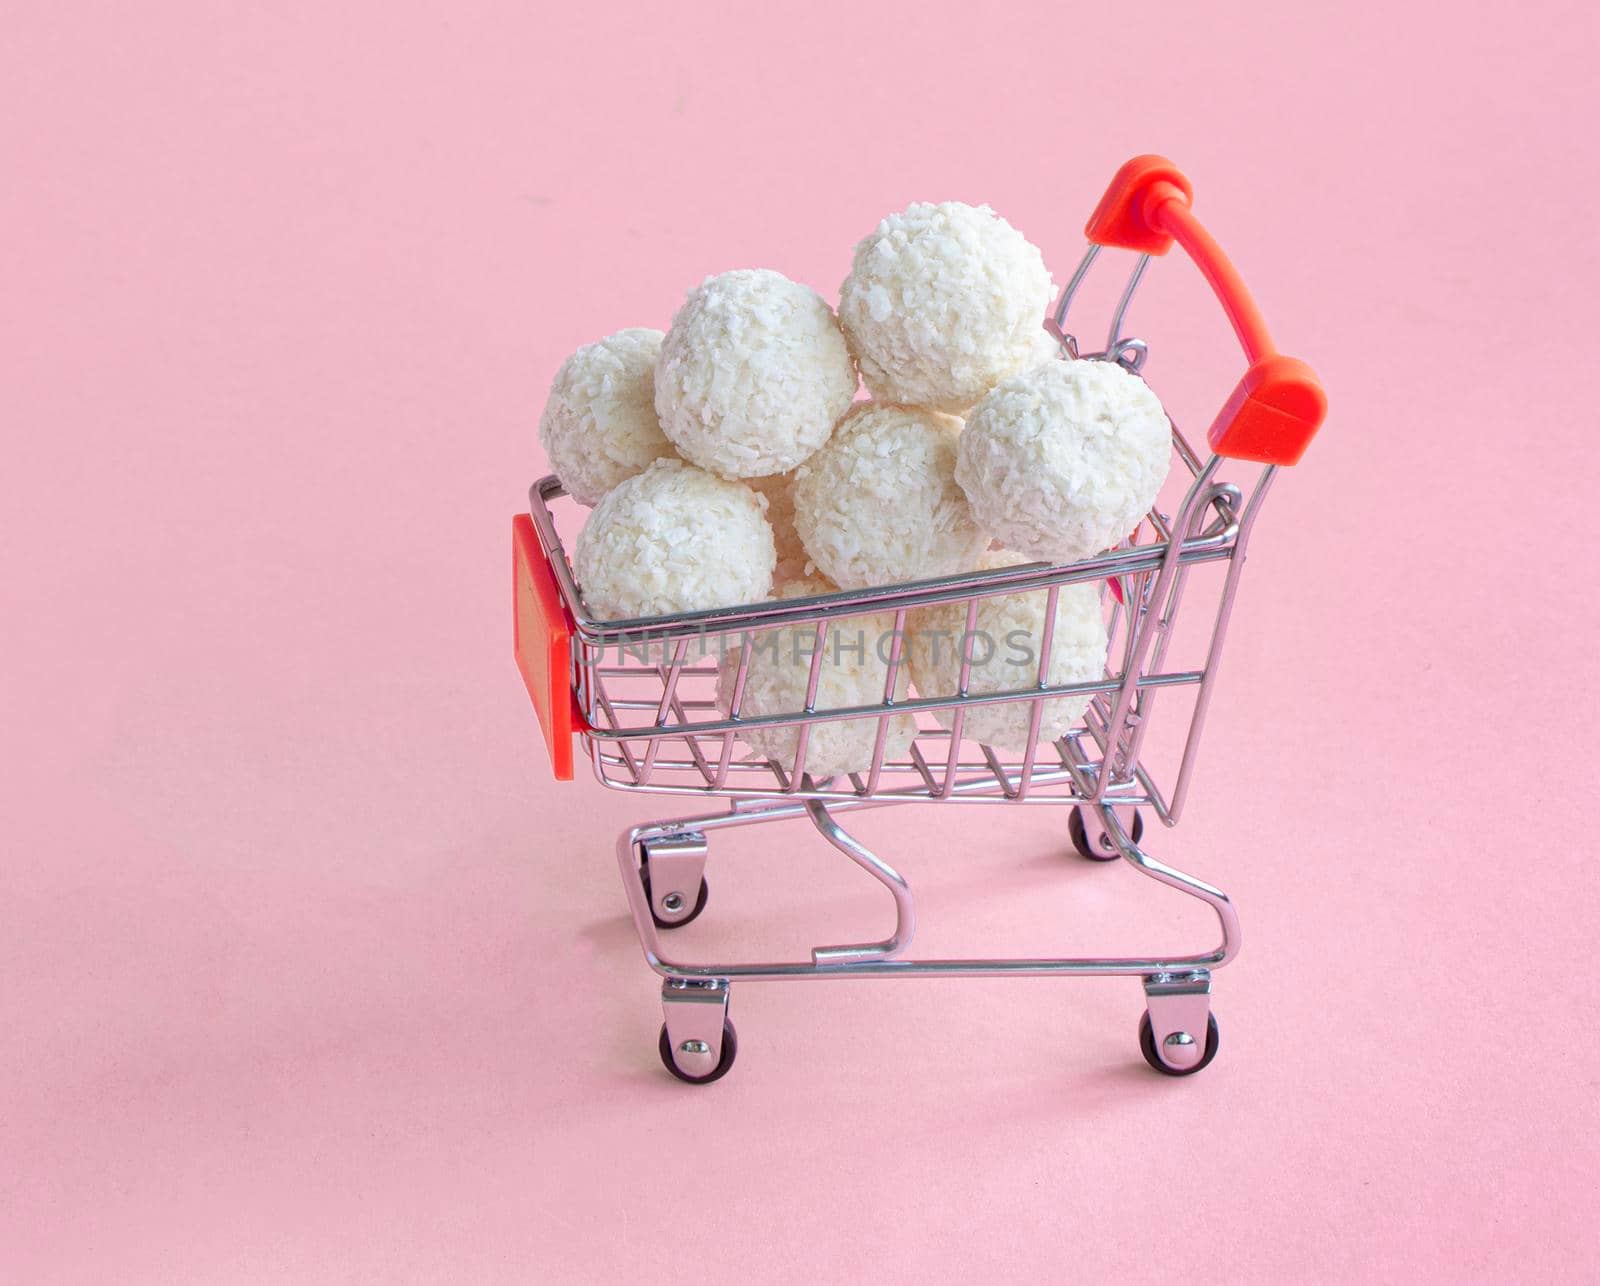 coconut round candies in a mini shopping basket, isolate on a pinc background. Supermarket shopping concept. full cart of sweets. High quality photo